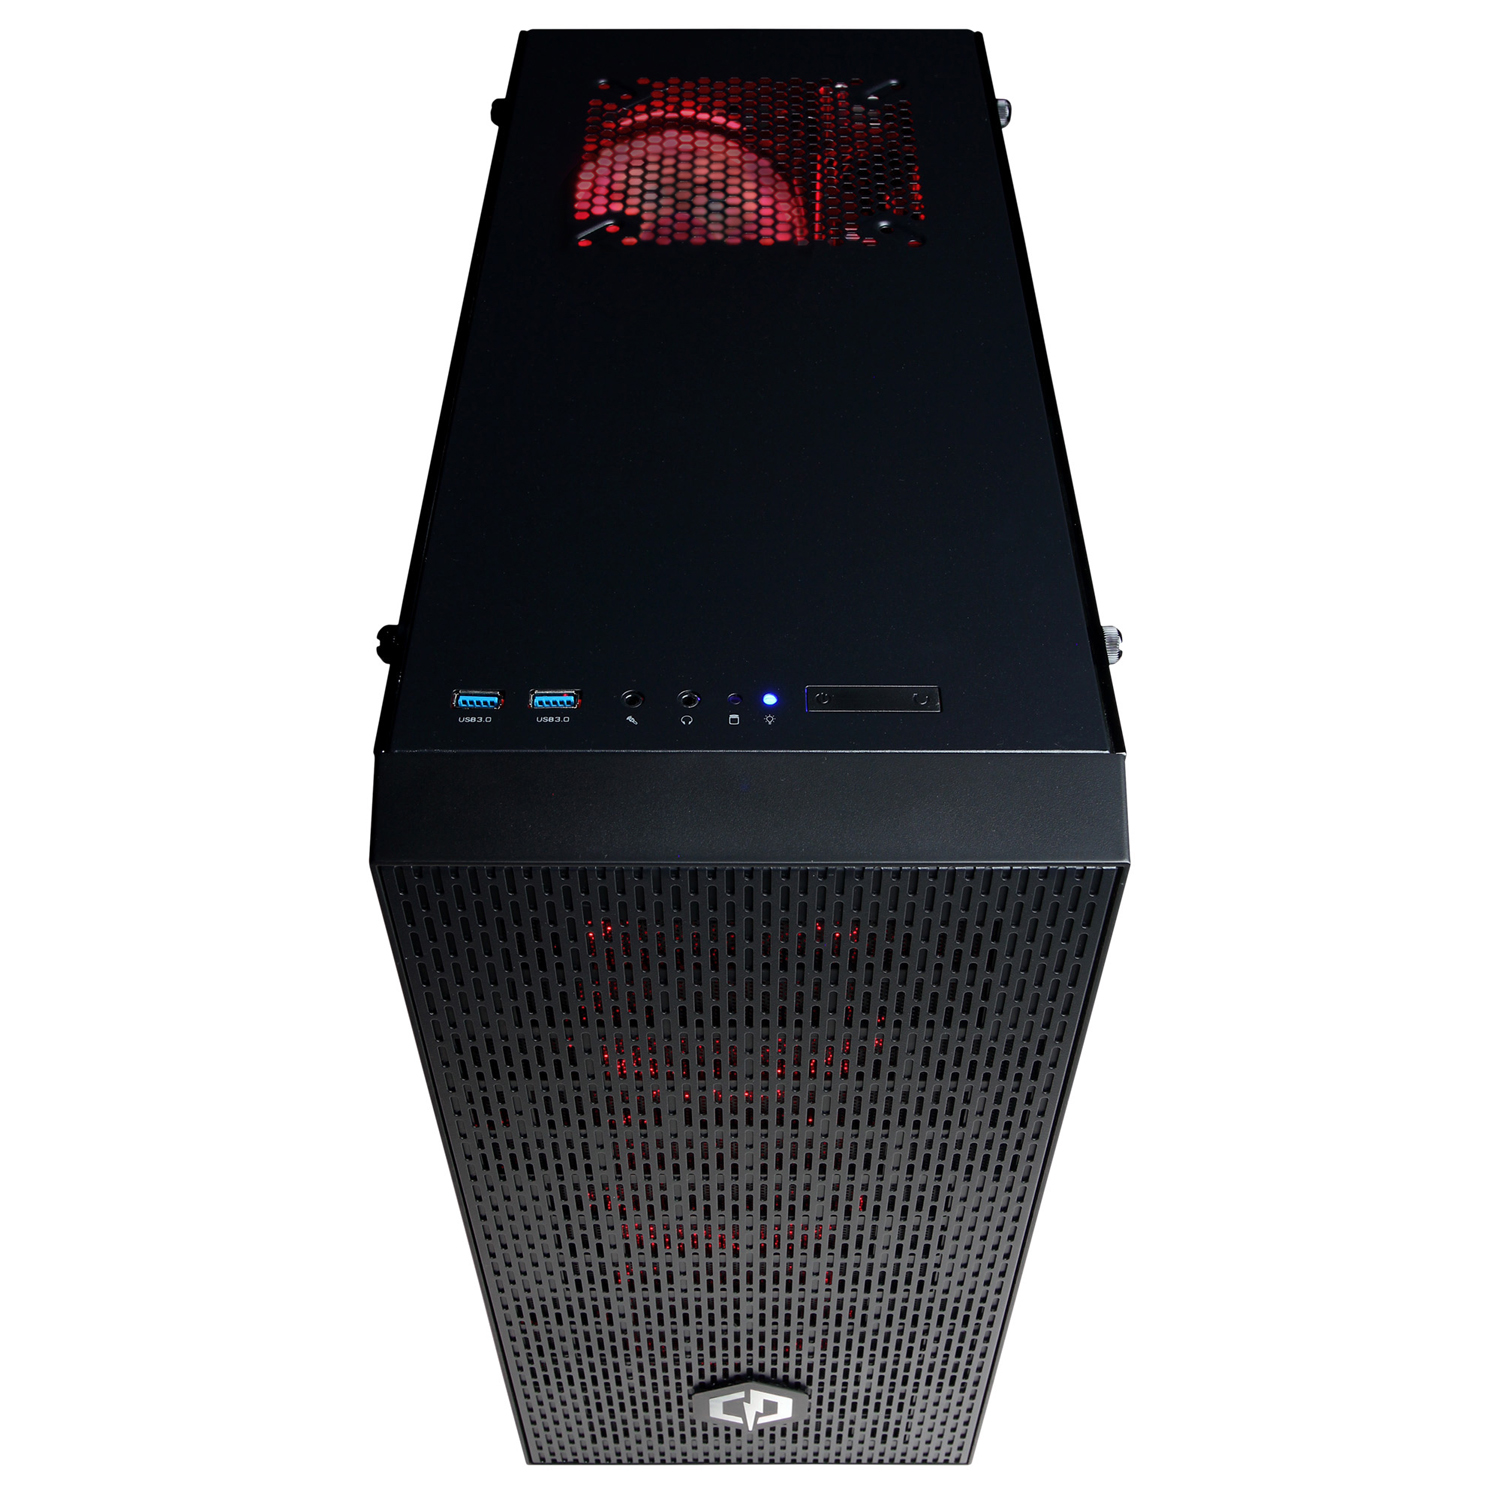 CYBERPOWERPC Gamer Master GMA6400CPG w/ AMD Ryzen 7 2700X Processor, NVIDIA GeForce GTX 1070 Ti Graphics, 16GB Memory, 240GB SSD, 2TB Hard Drive and Windows 10 Home (Monitor Not Included) - image 2 of 56